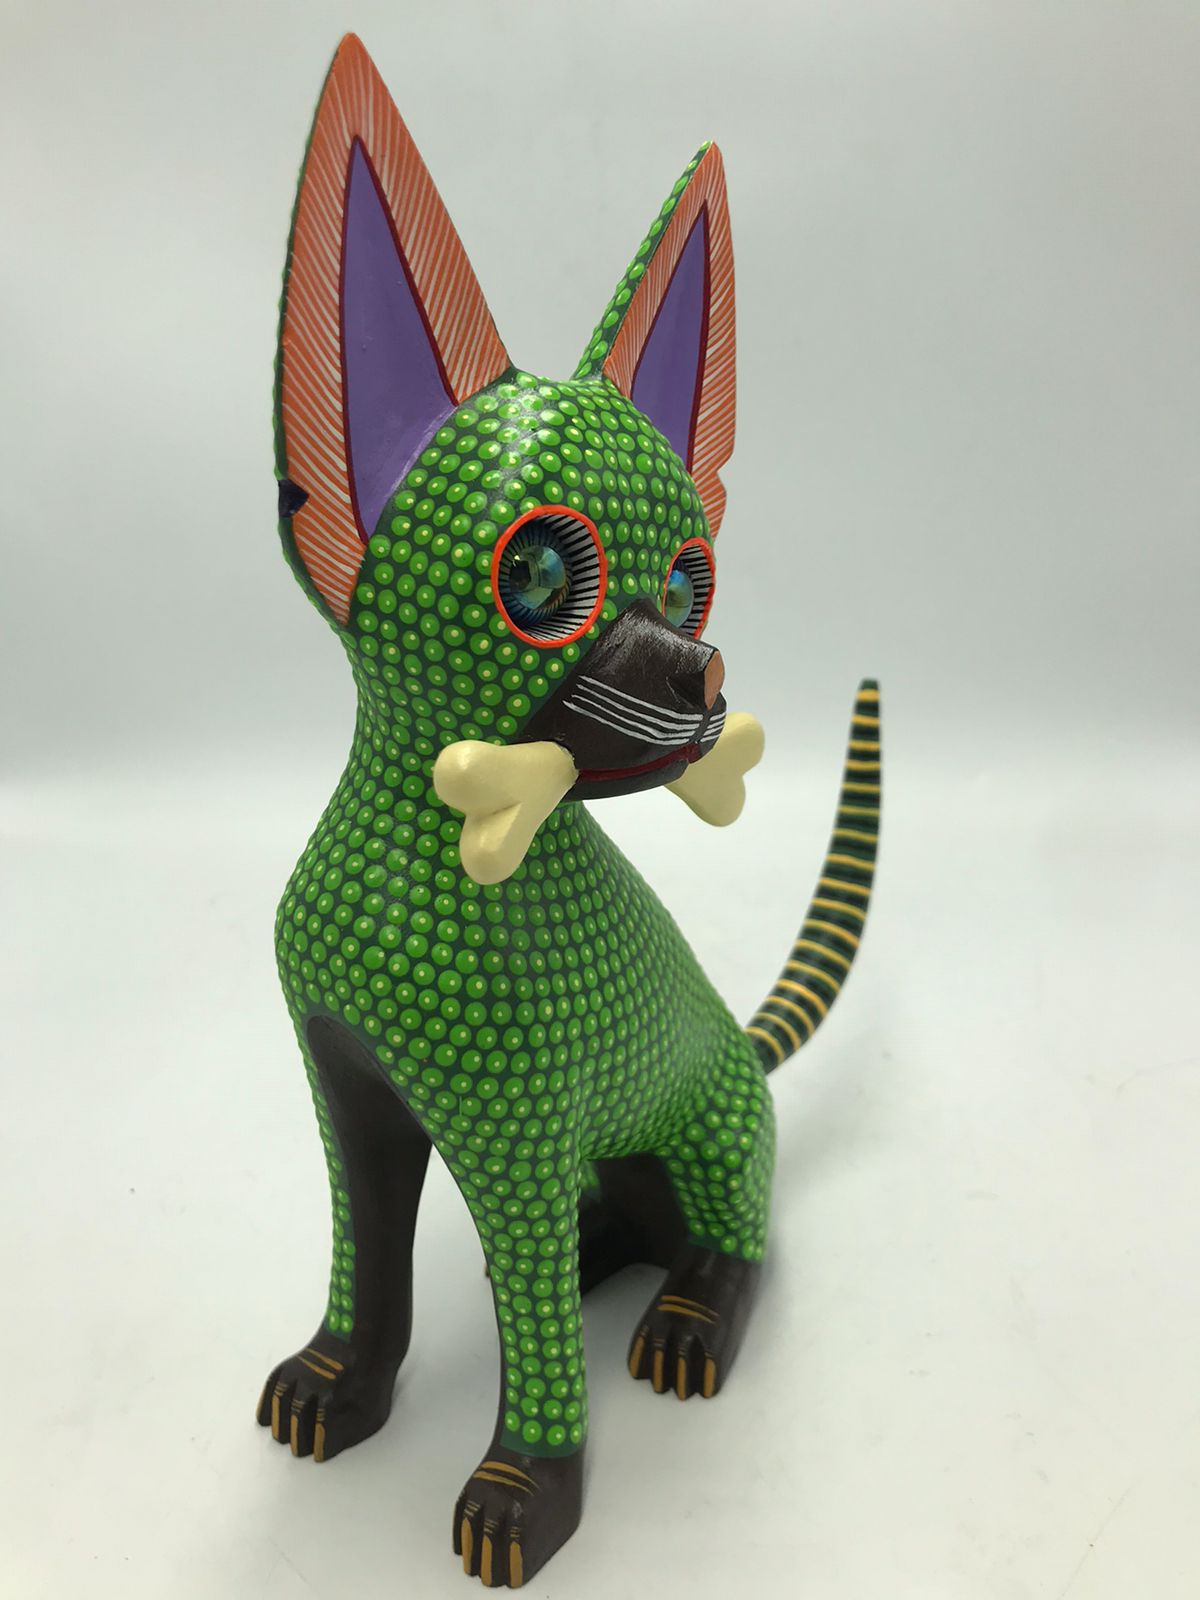 Great Mexican Oaxacan Wood Carving Alebrije Chihuahua By Isaac Fabian PP5855